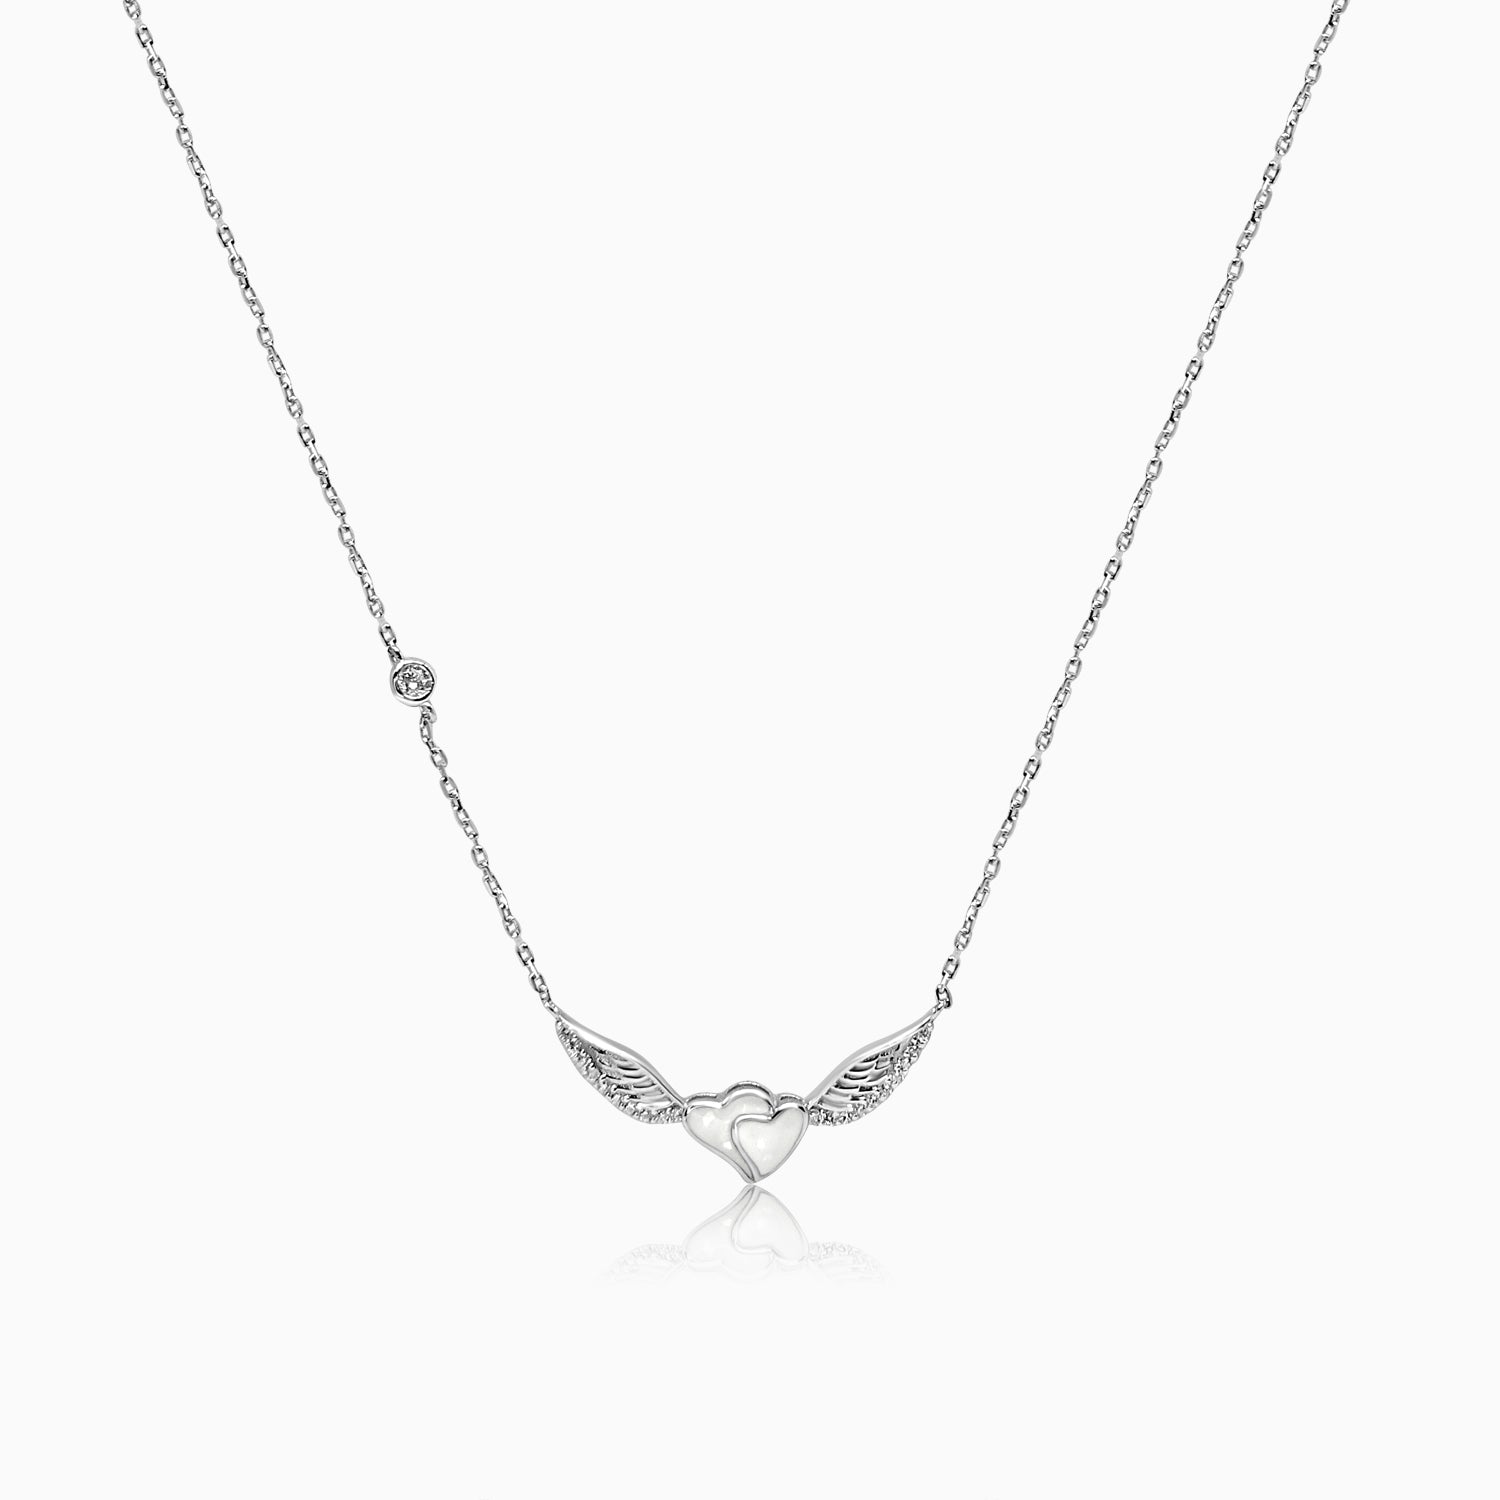 Silver Fly High Love Hearts Necklace